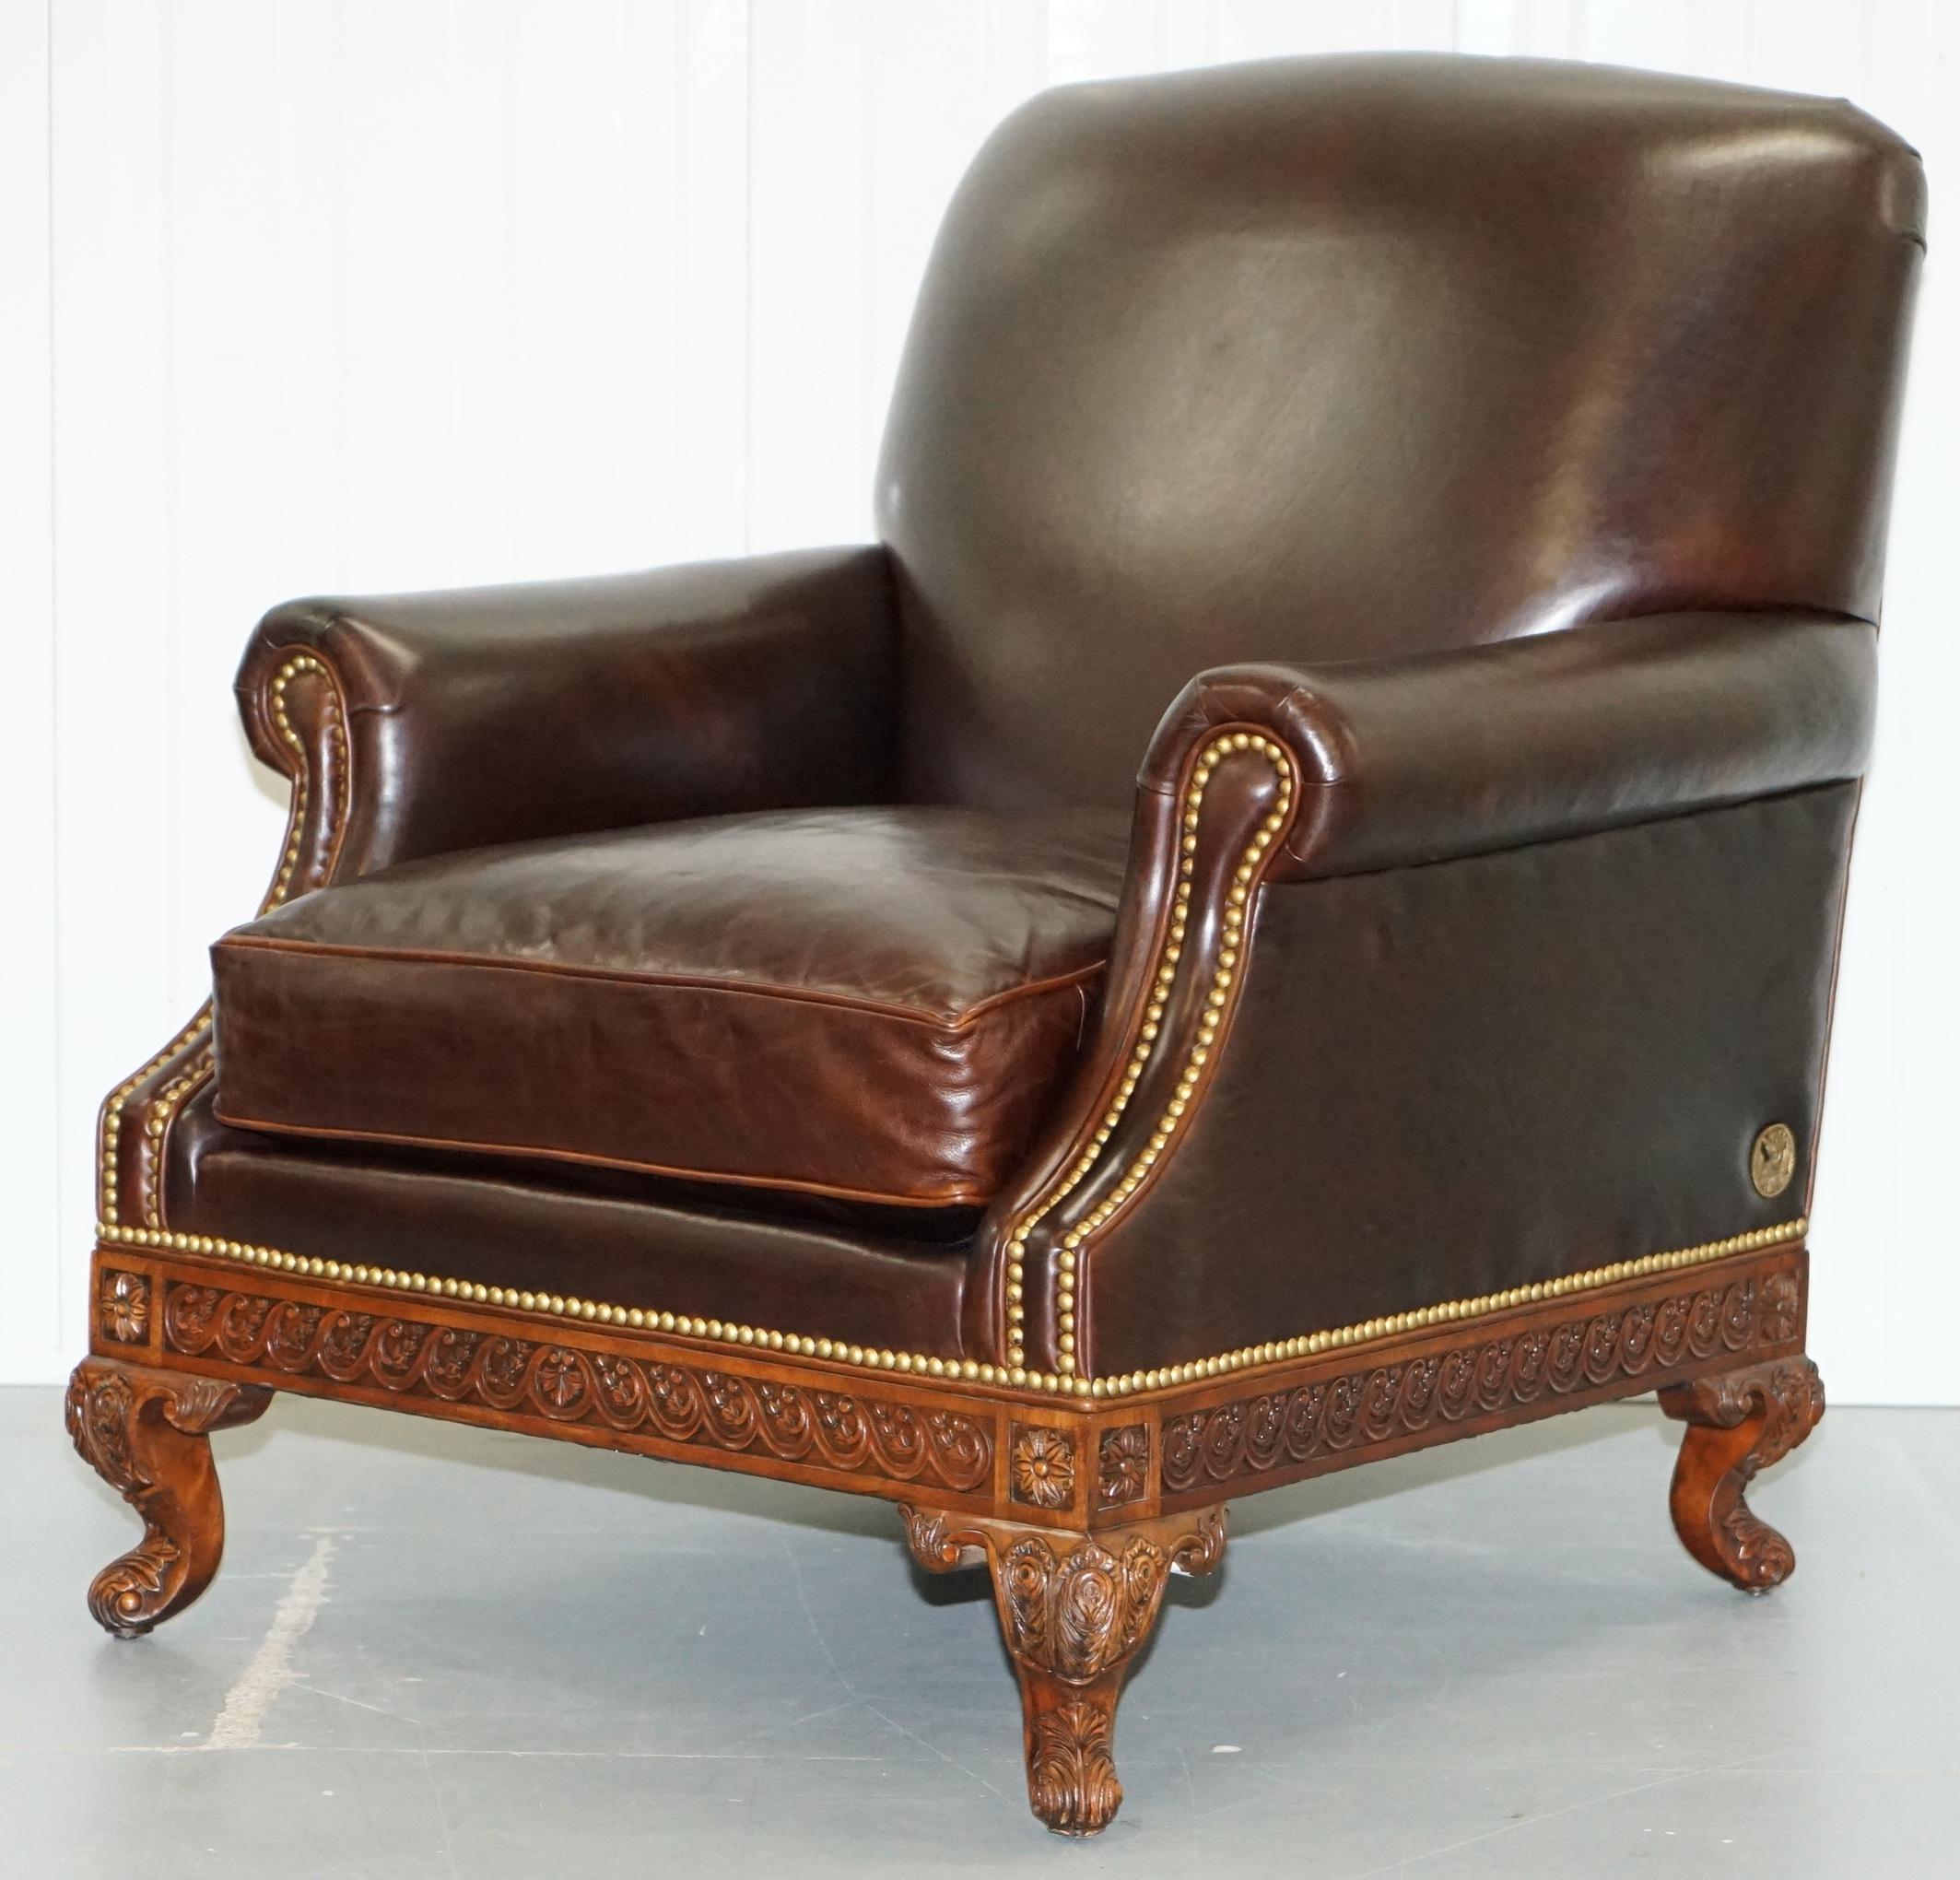 We are delighted to offer for sale this exceptionally rare pair of aged brown leather armchairs handmade in England for the Althorp Estate by the Spencer family which is, of course, was Princess Diana’s family

What a wonderful find, no longer